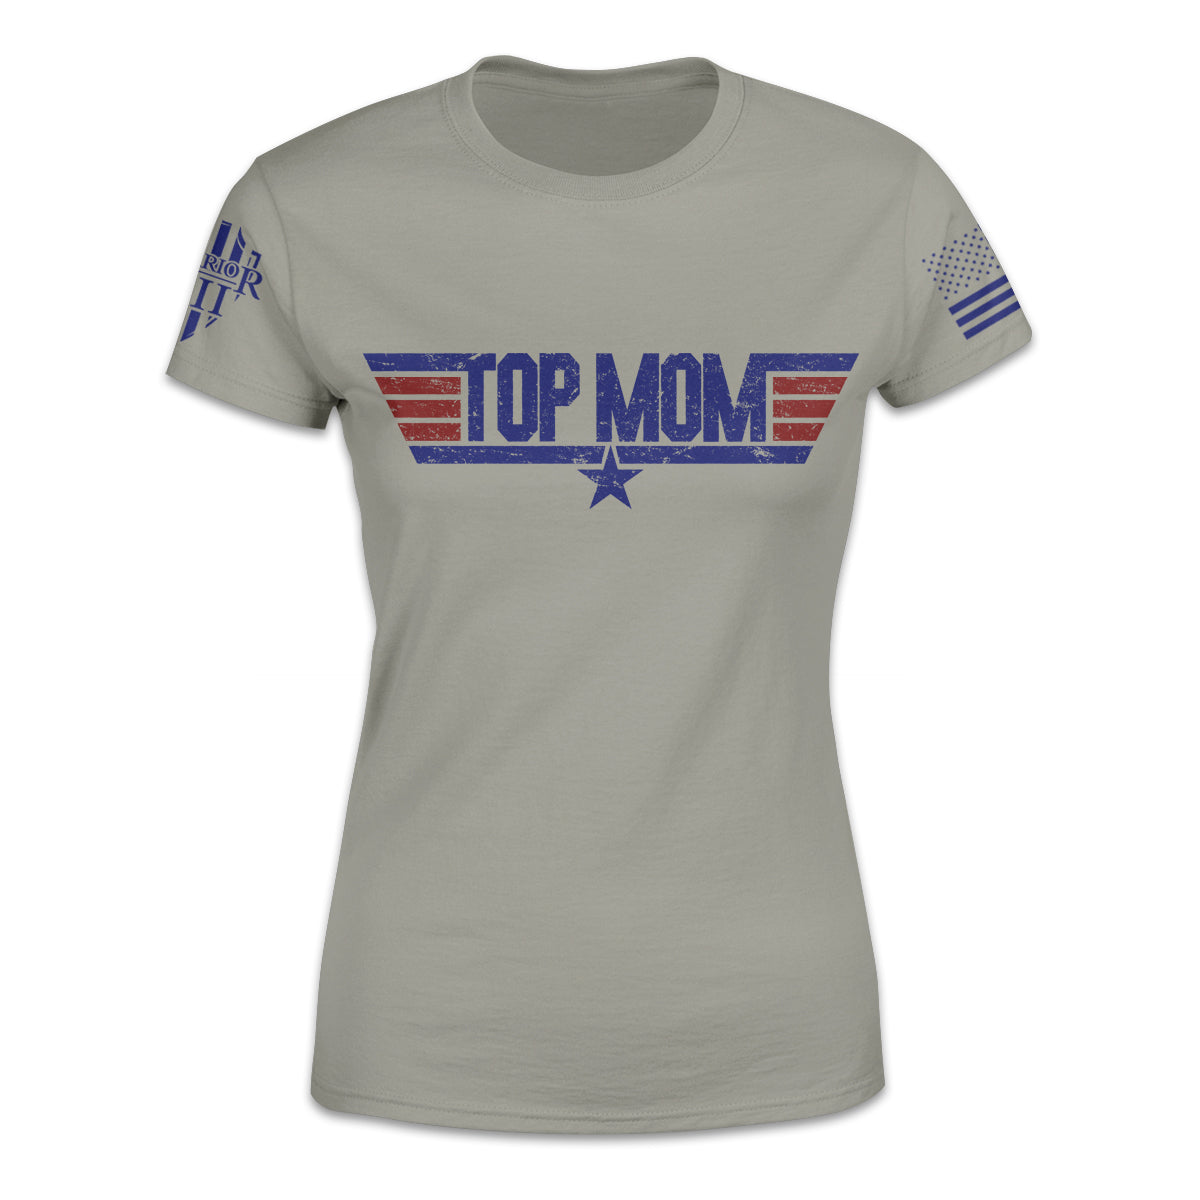 A light grey women's relaxed fit shirt with the words "top dad" printed on the front.